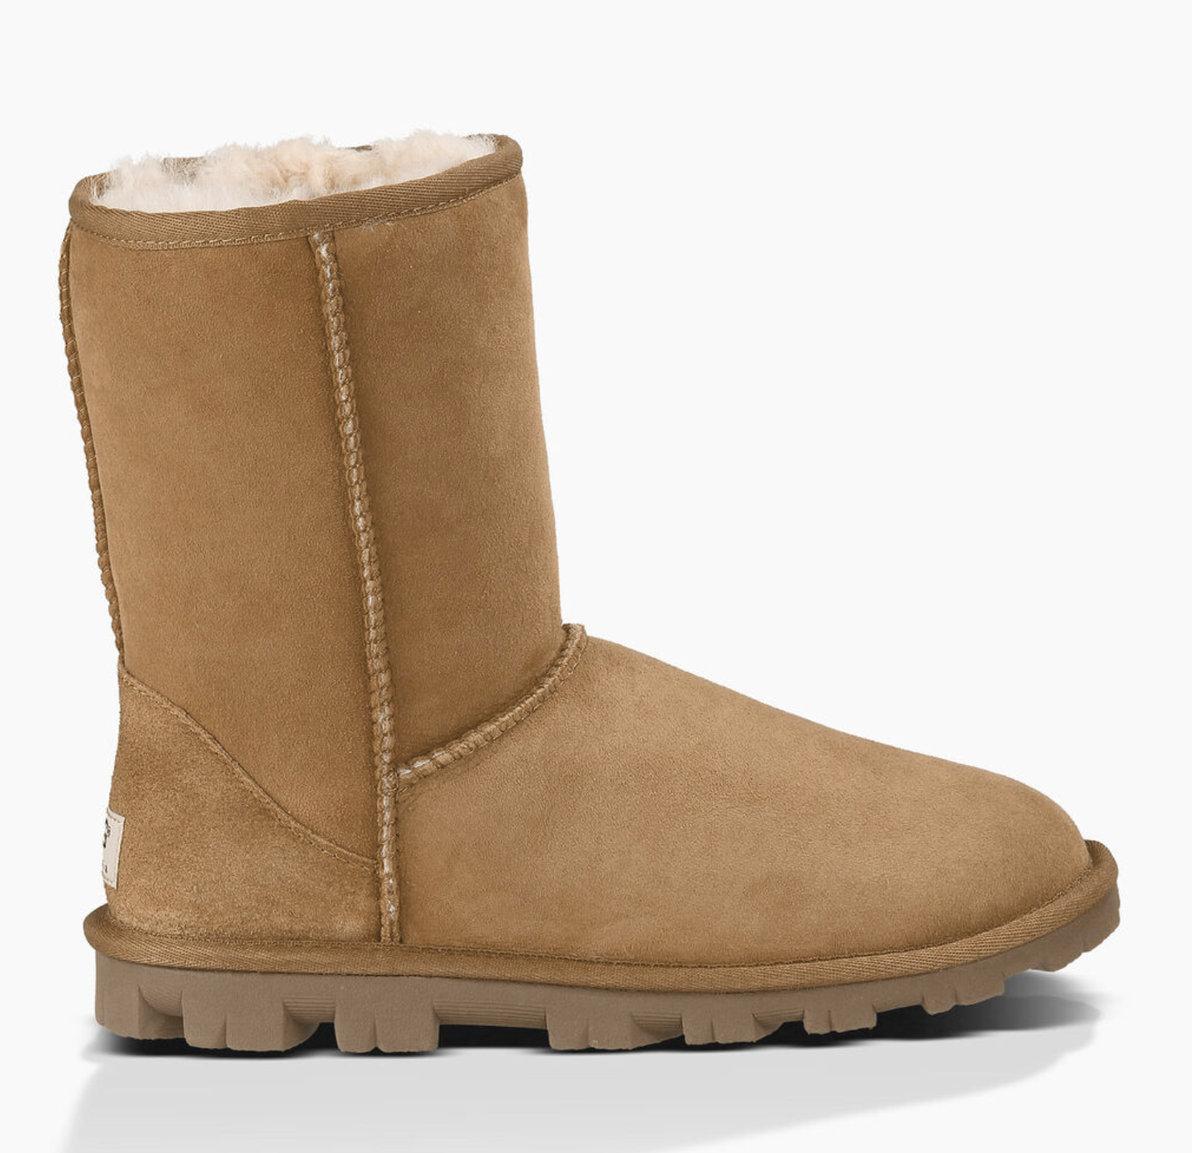 cyber monday deals uggs